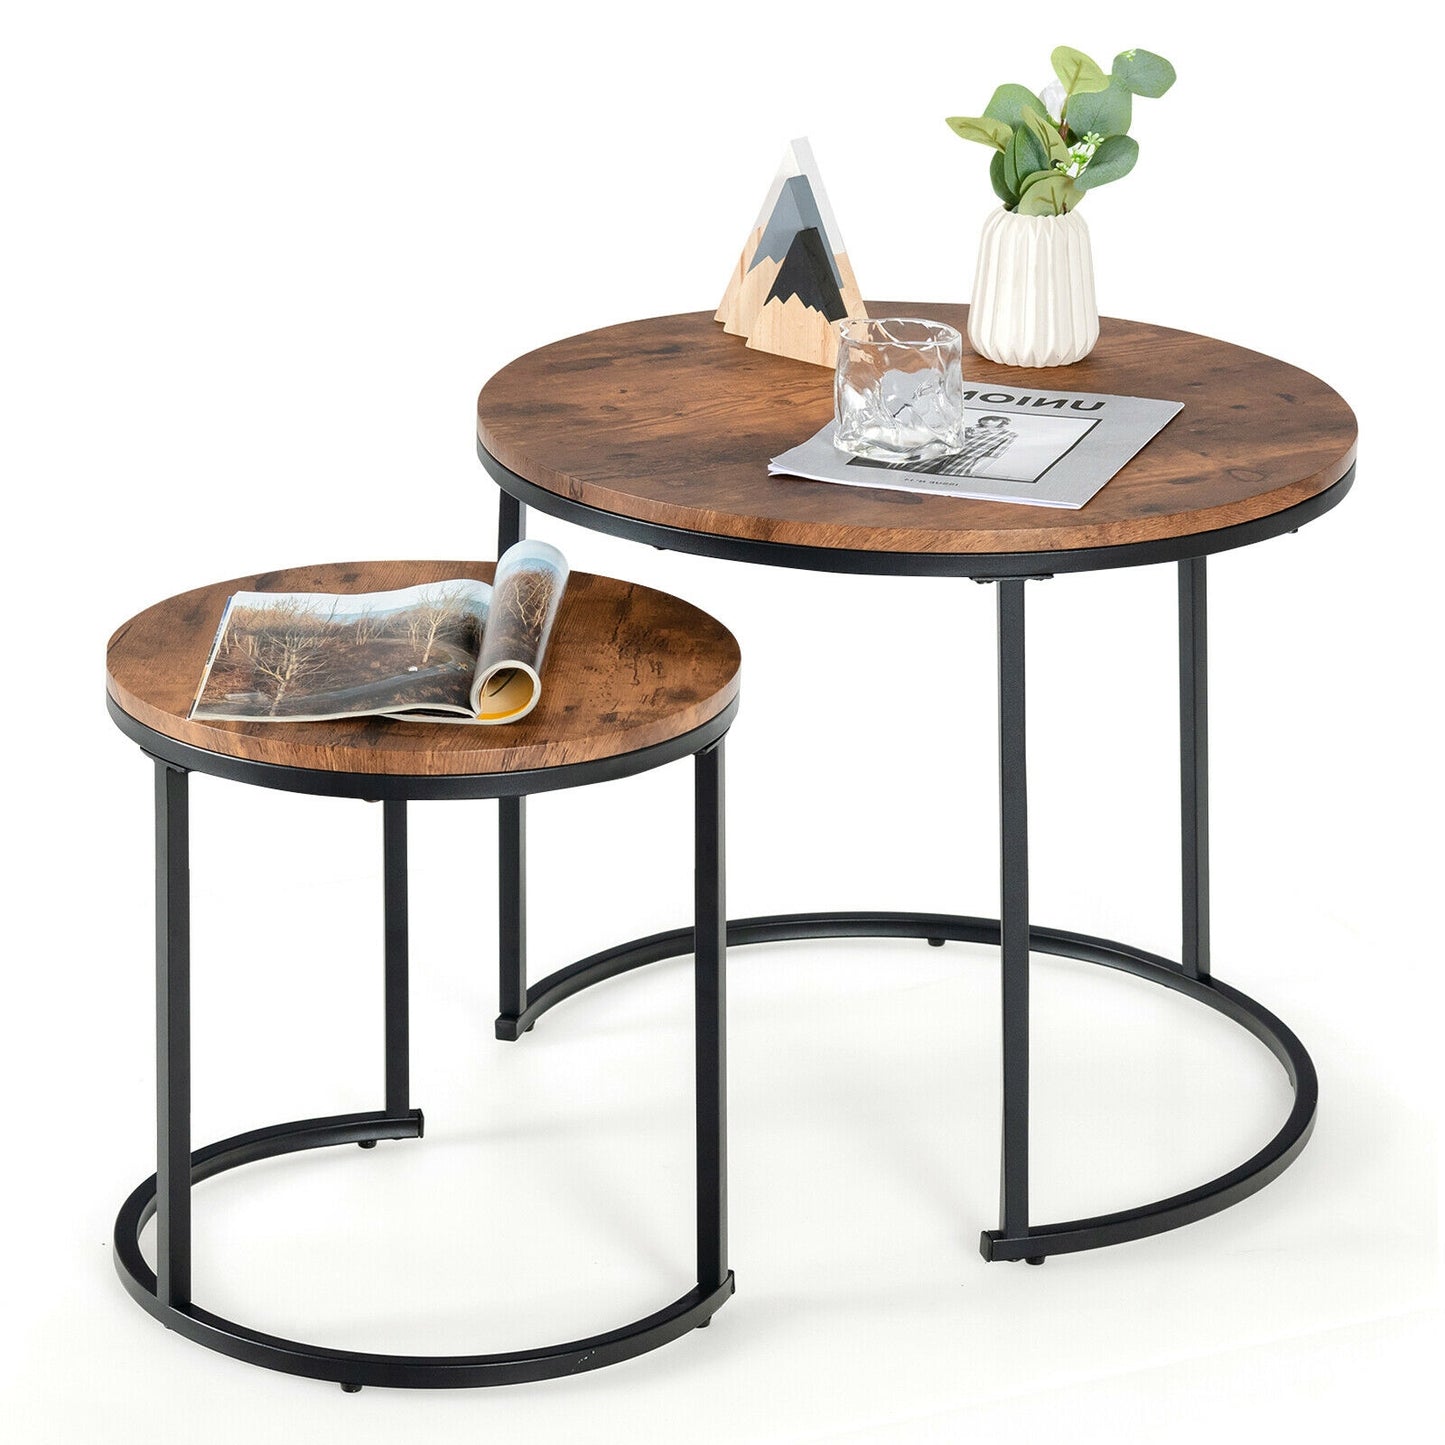 Set of 2 Modern Round Stacking Nesting Coffee Tables for Living Room-Rustic Brown